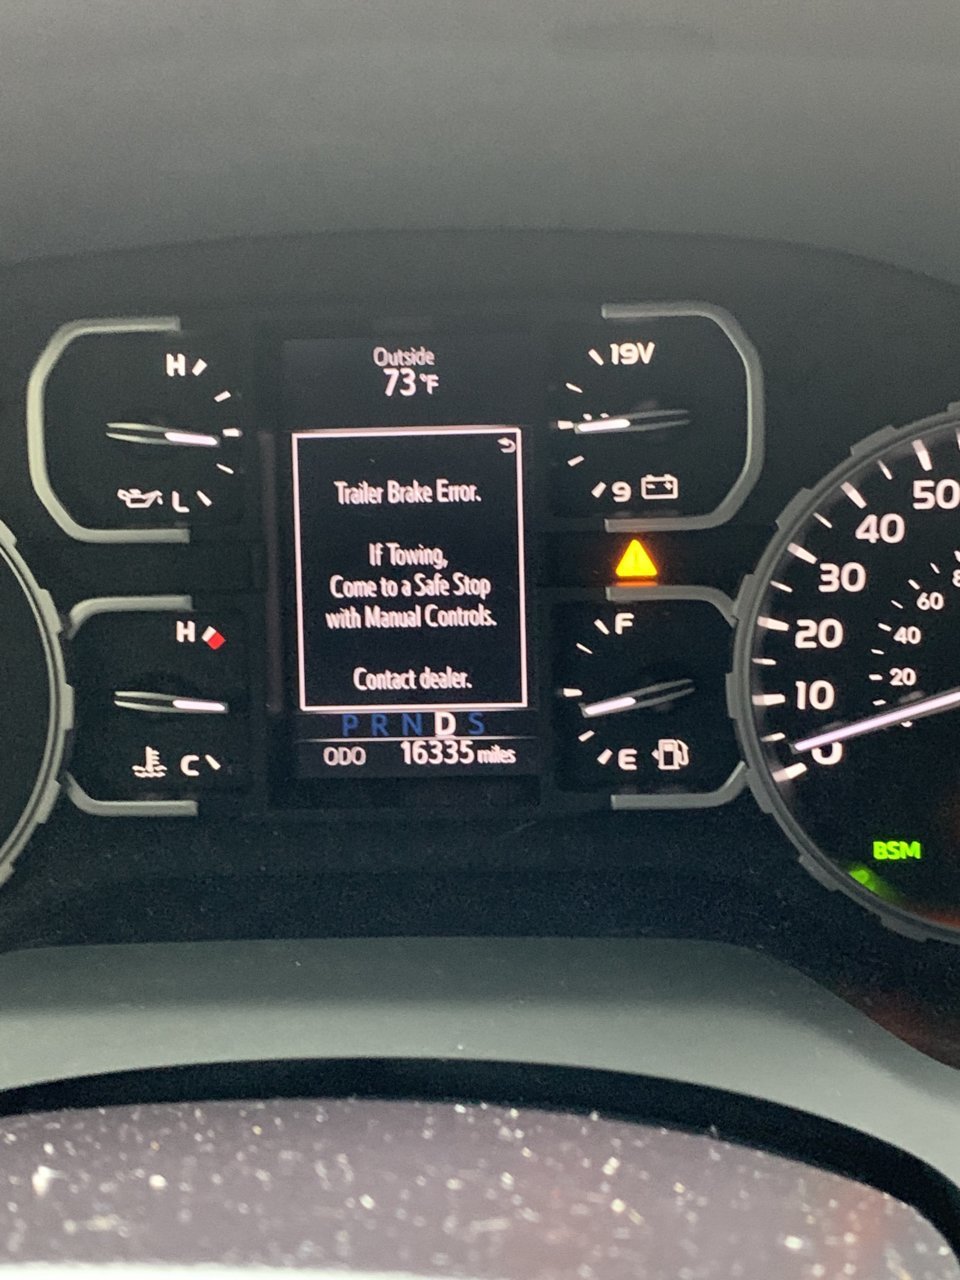 TSS/Pre Collision System Malfunction.... | Page 6 | Toyota Tundra Forum 2019 Toyota Corolla Pre Collision System Malfunction